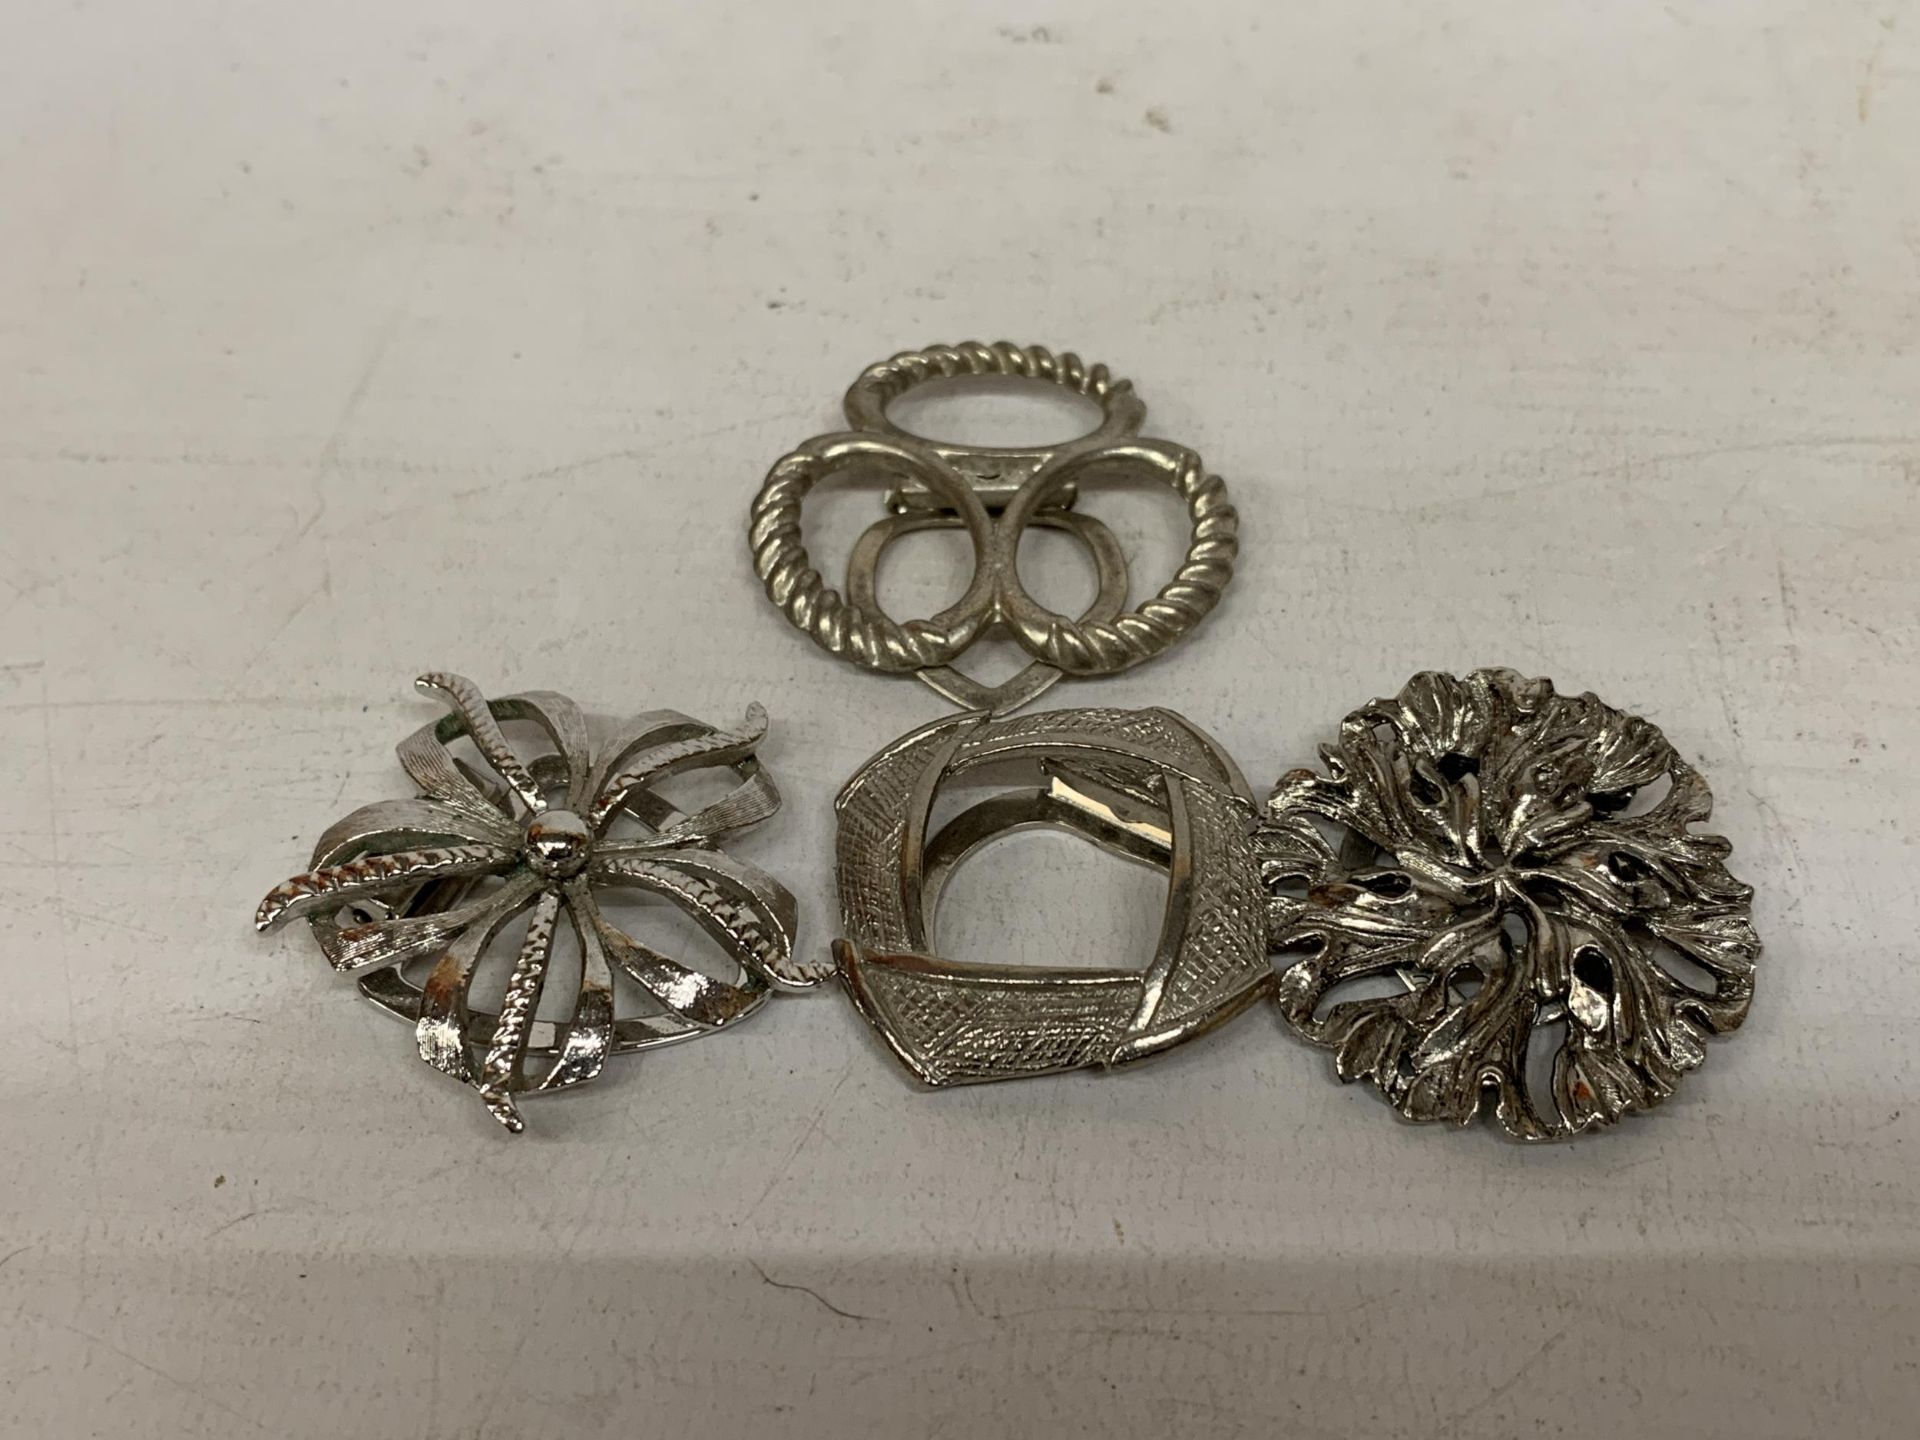 A QUANTITY OF VINTAGE BELT BUCKLES, HAIR SLIDES AND HAT PINS - Image 3 of 3